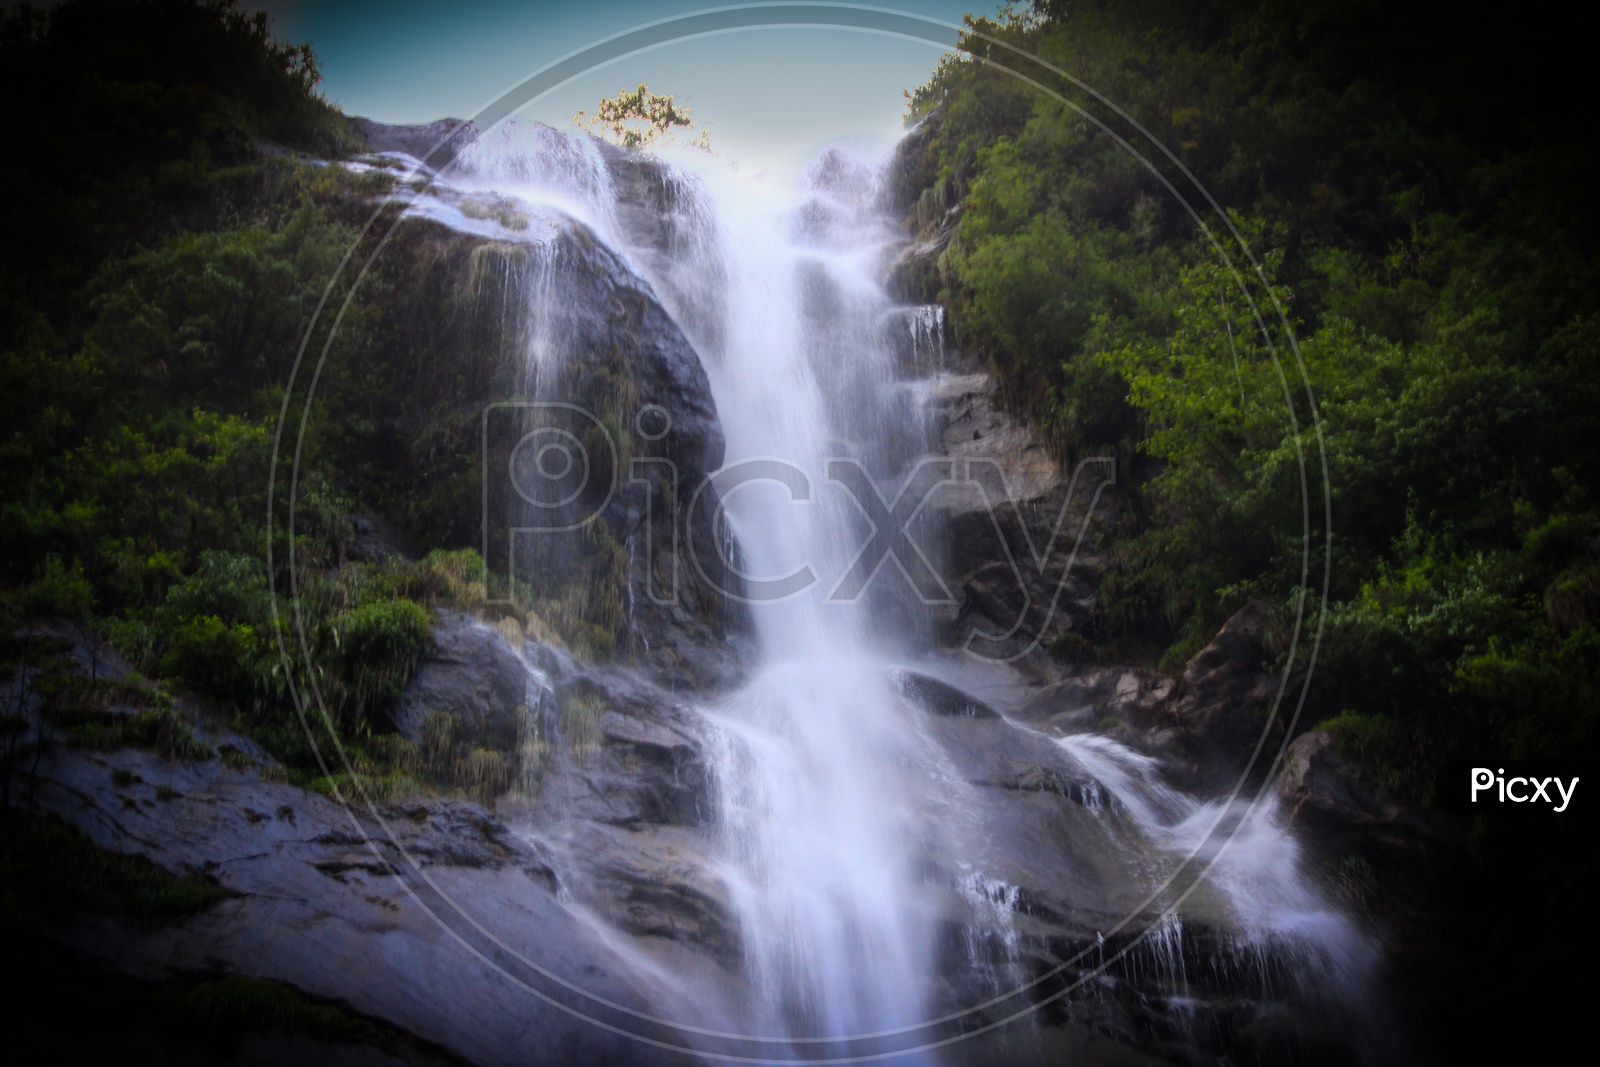 A Natural Waterfall In Hills Of Sikkim, India In Between Forest Vegetation With Captured With Slow Shutter Speed